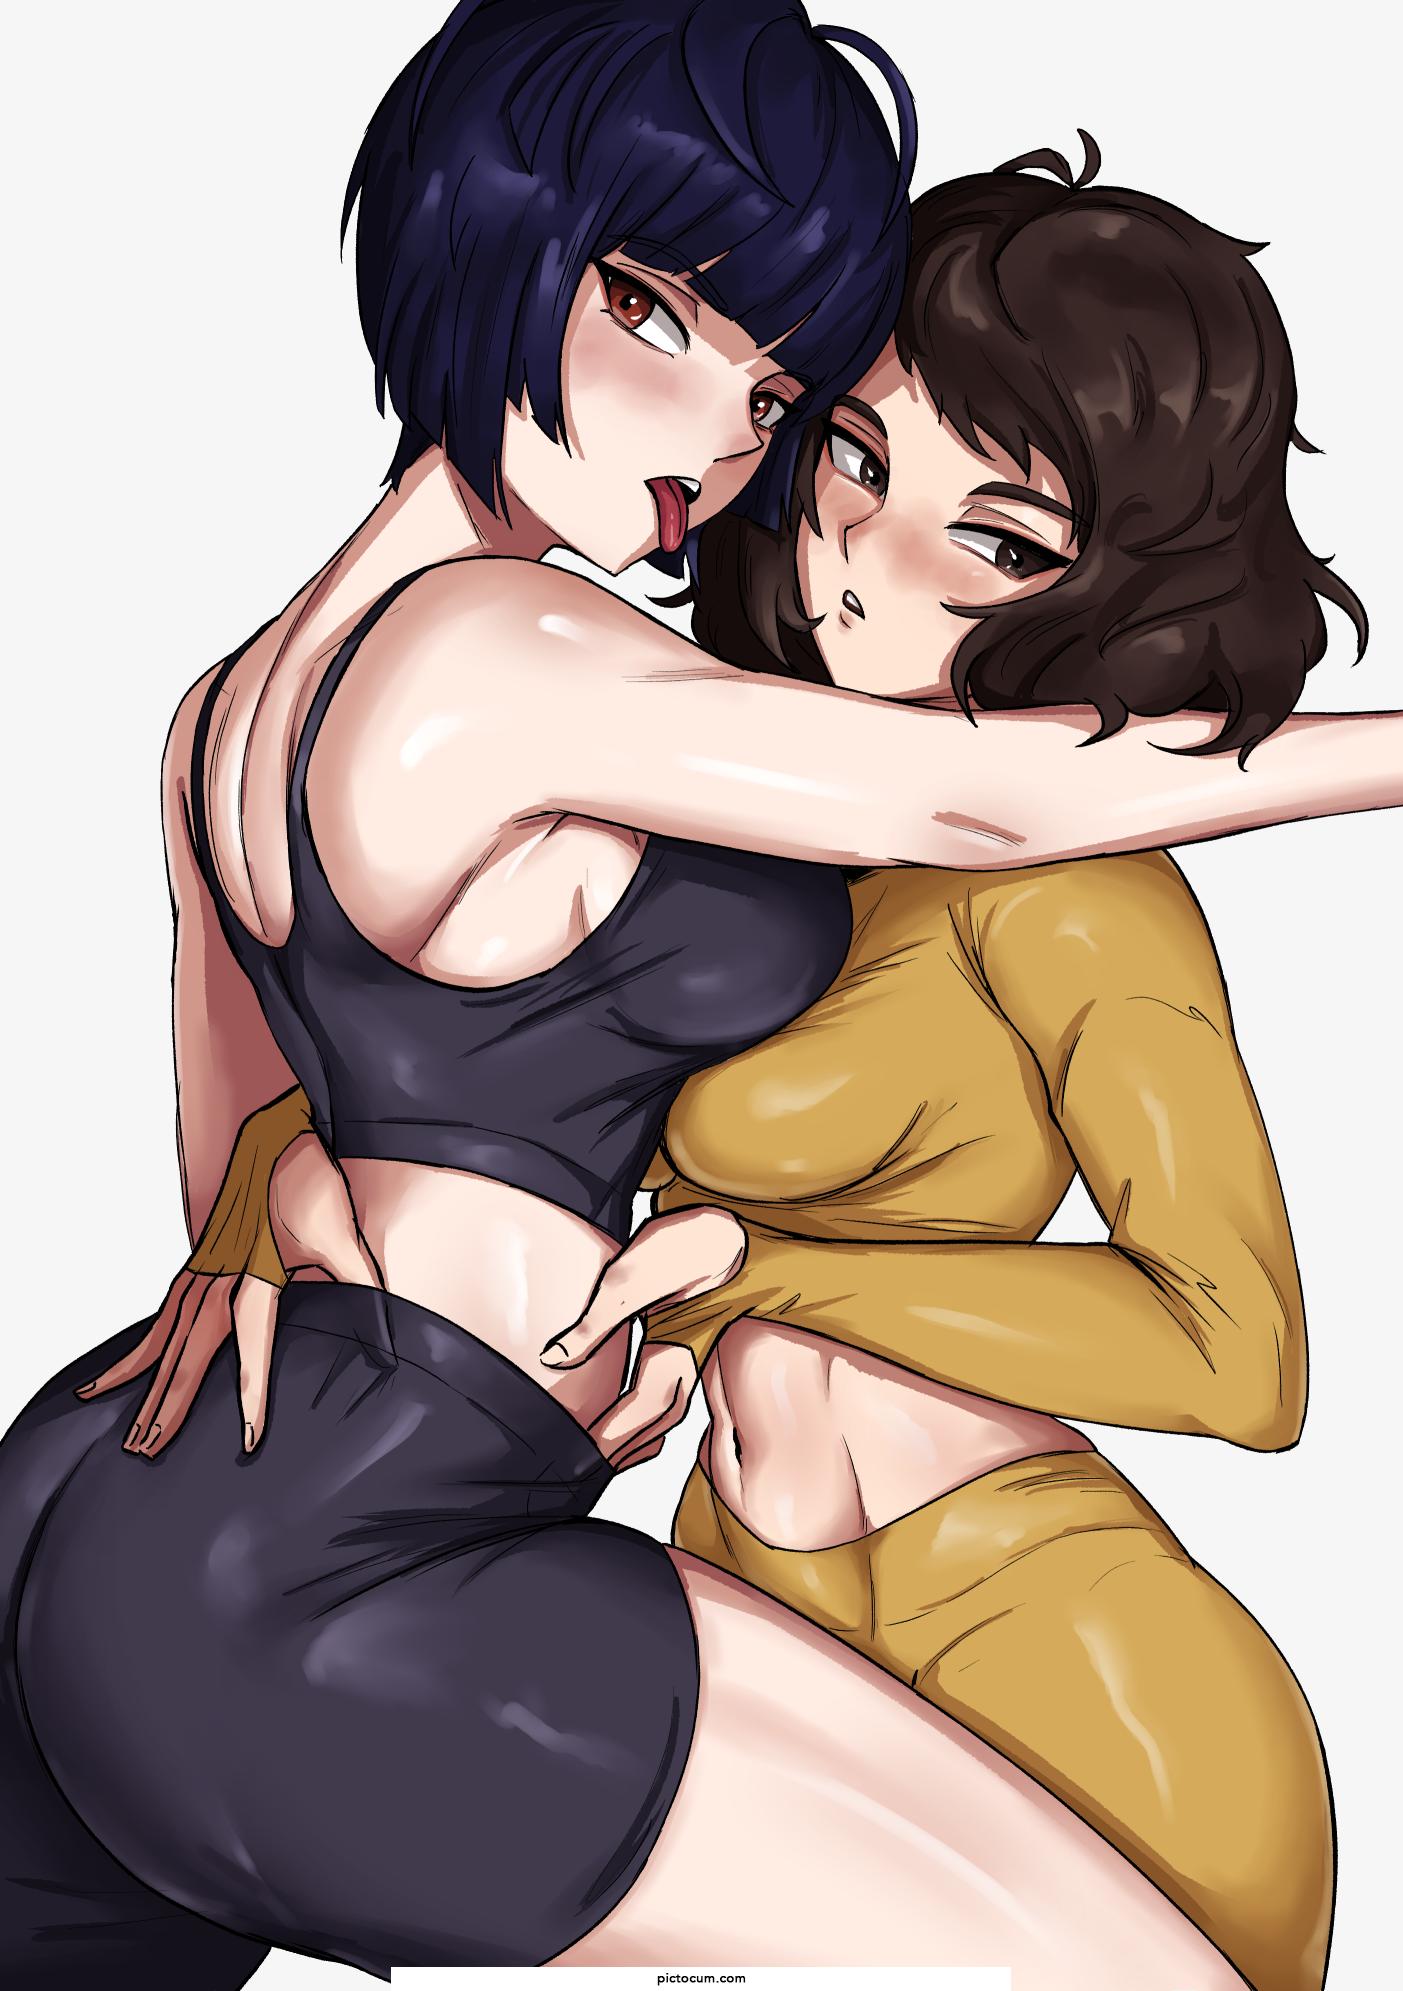 Takemi and Kawakami Working Out Together